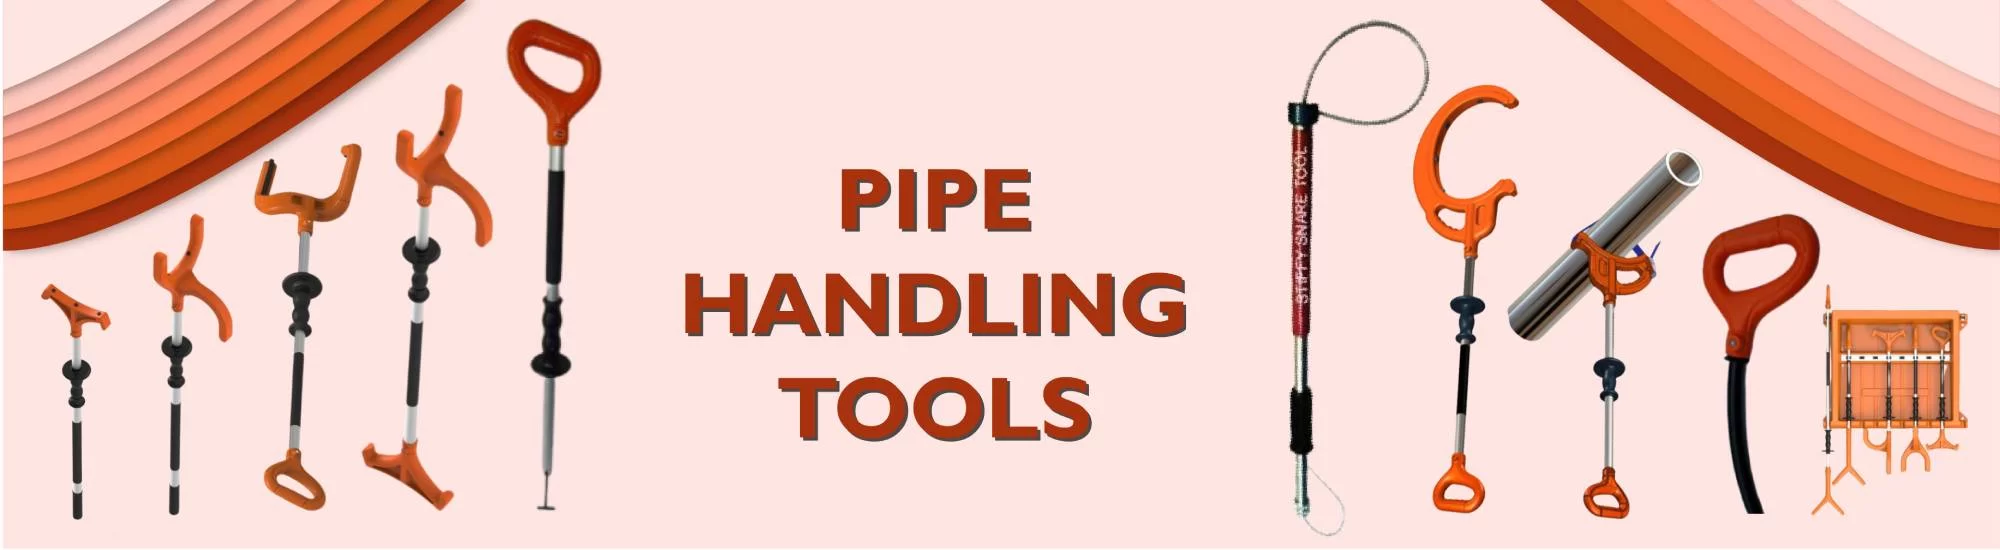 Pipe handling tools offshore